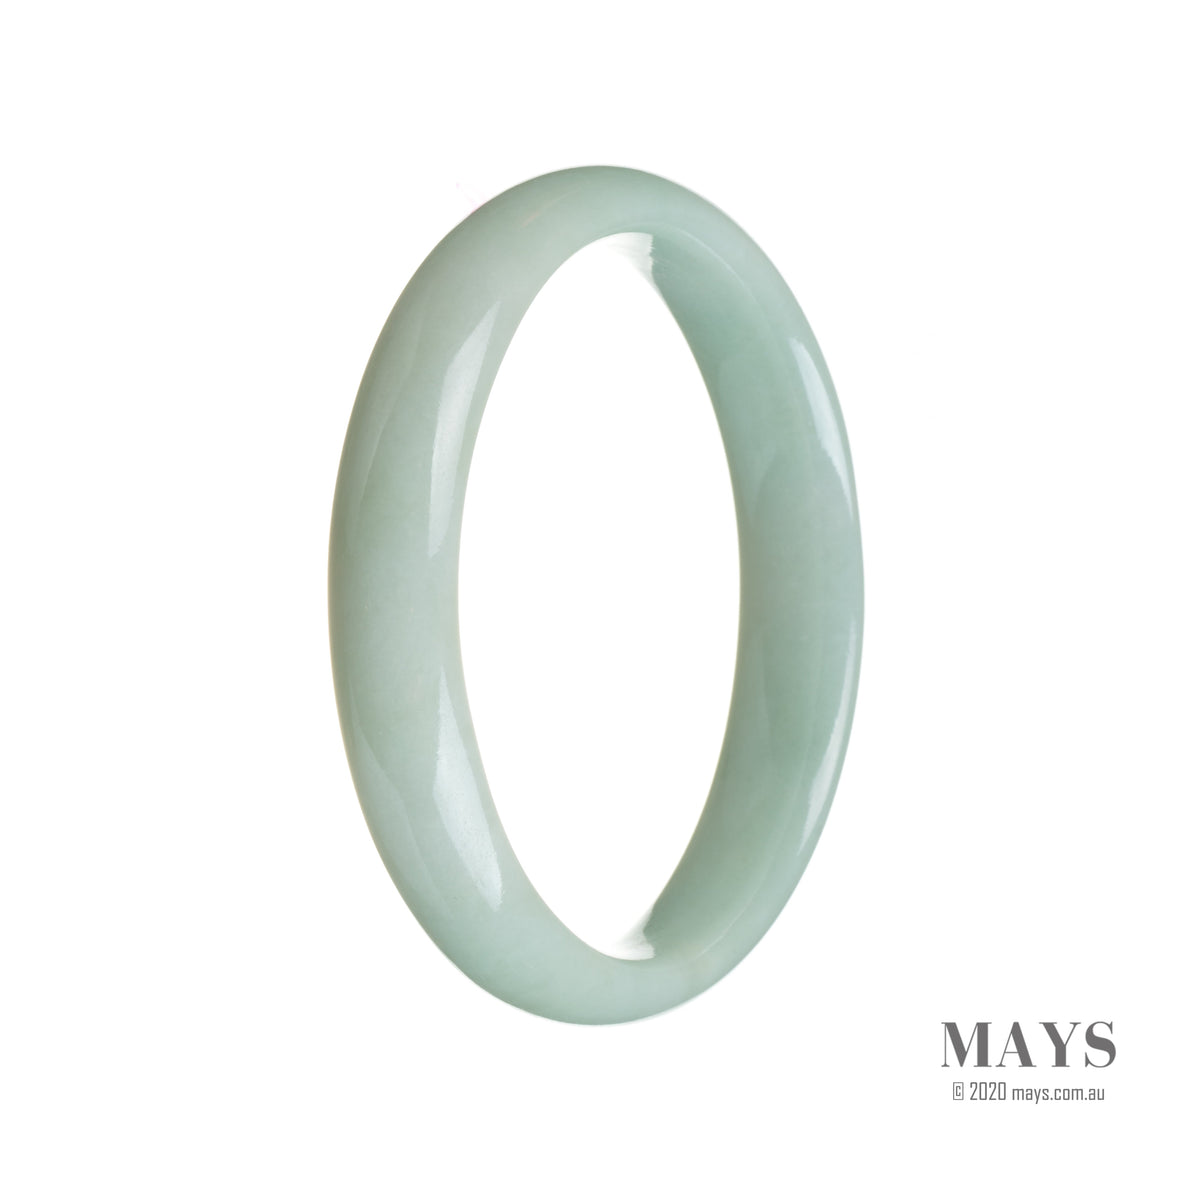 A close-up photo of a pale green Burmese jade bangle bracelet with a half moon shape, measuring 59mm in diameter. The bracelet has a smooth, polished surface and a high-quality grade A jade. It is a stunning piece of jewelry from the MAYS collection.